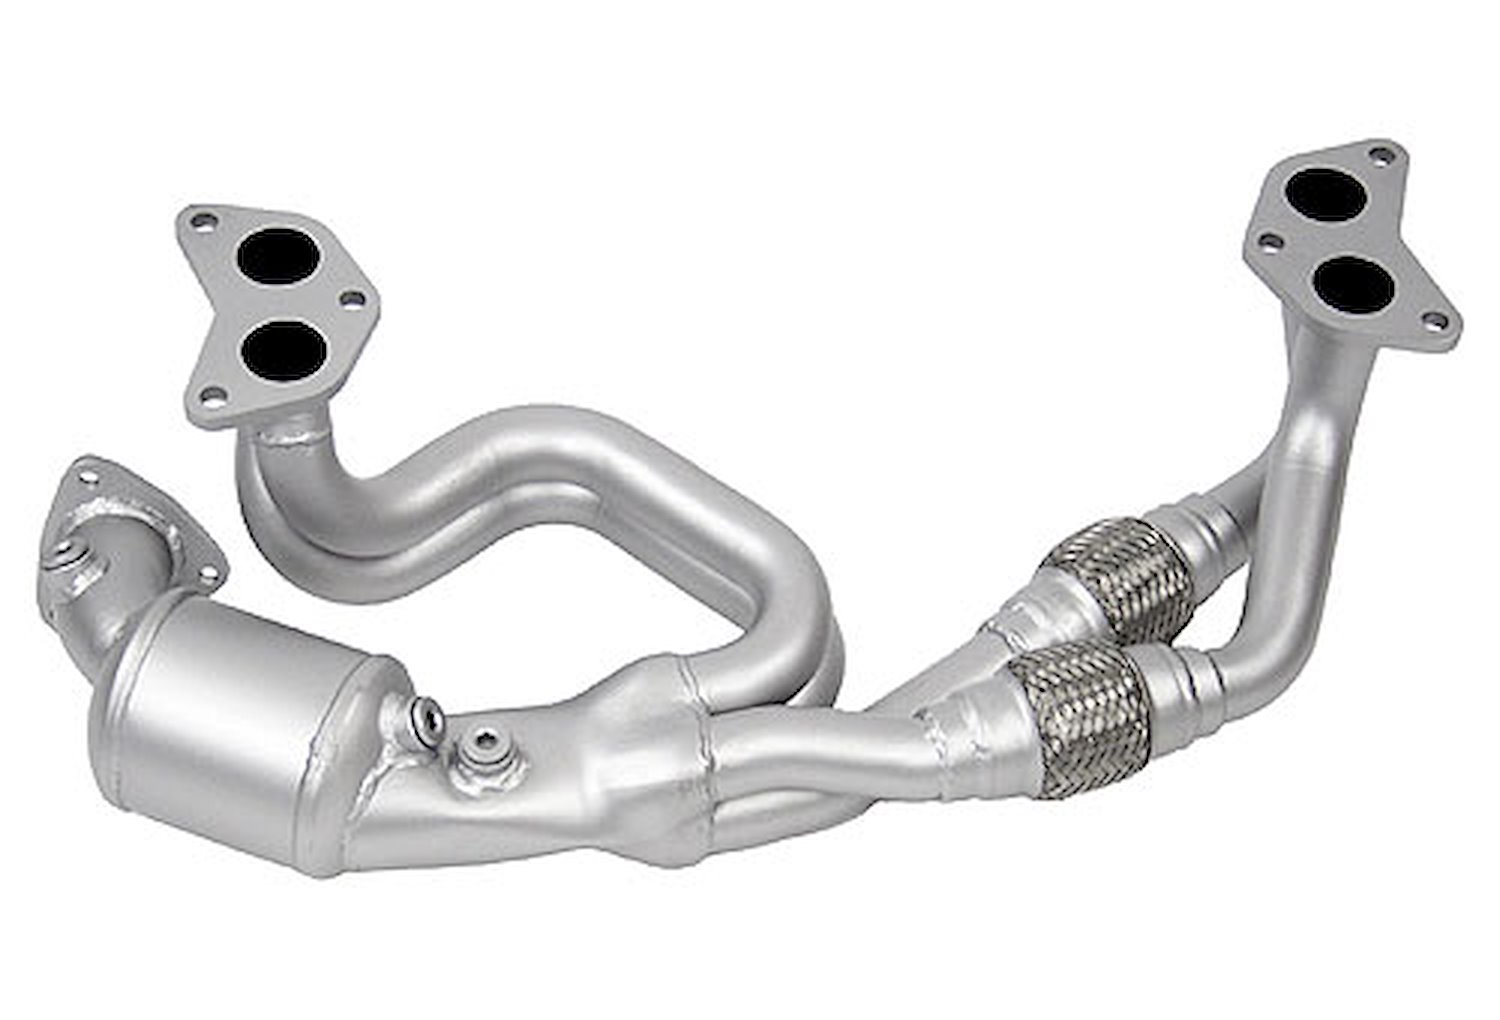 Direct-Fit Catalytic Converter 2006-09 for Subaru Legacy, Outback 2.5i